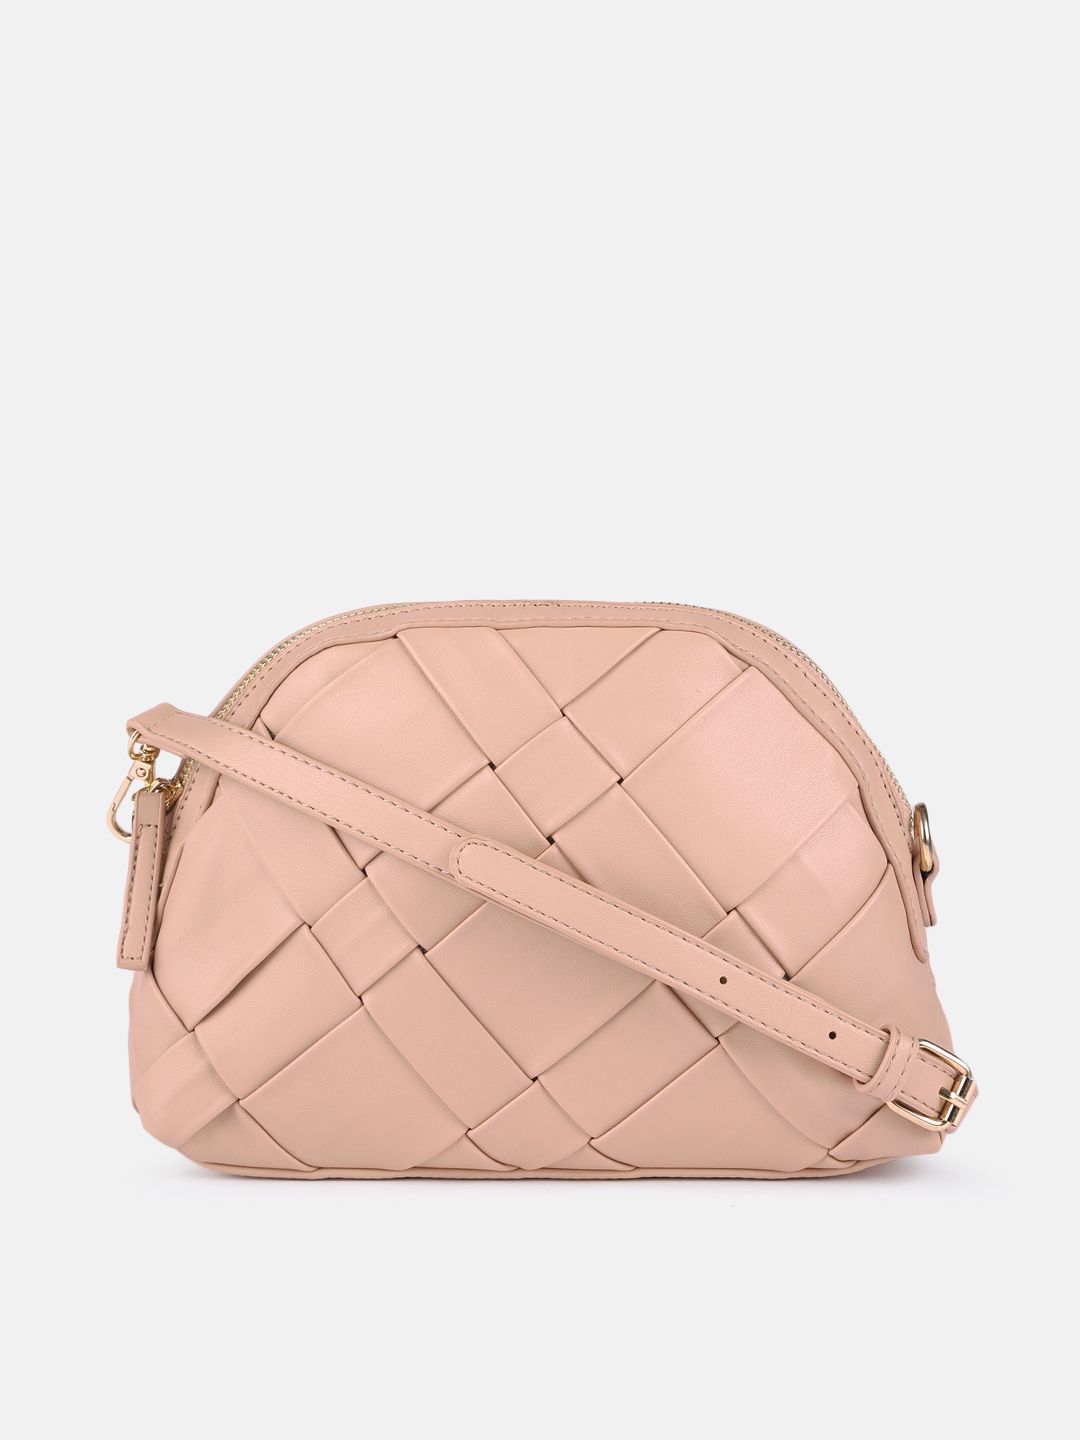 CORSICA Pink Self Design Structured Sling Bag Price in India